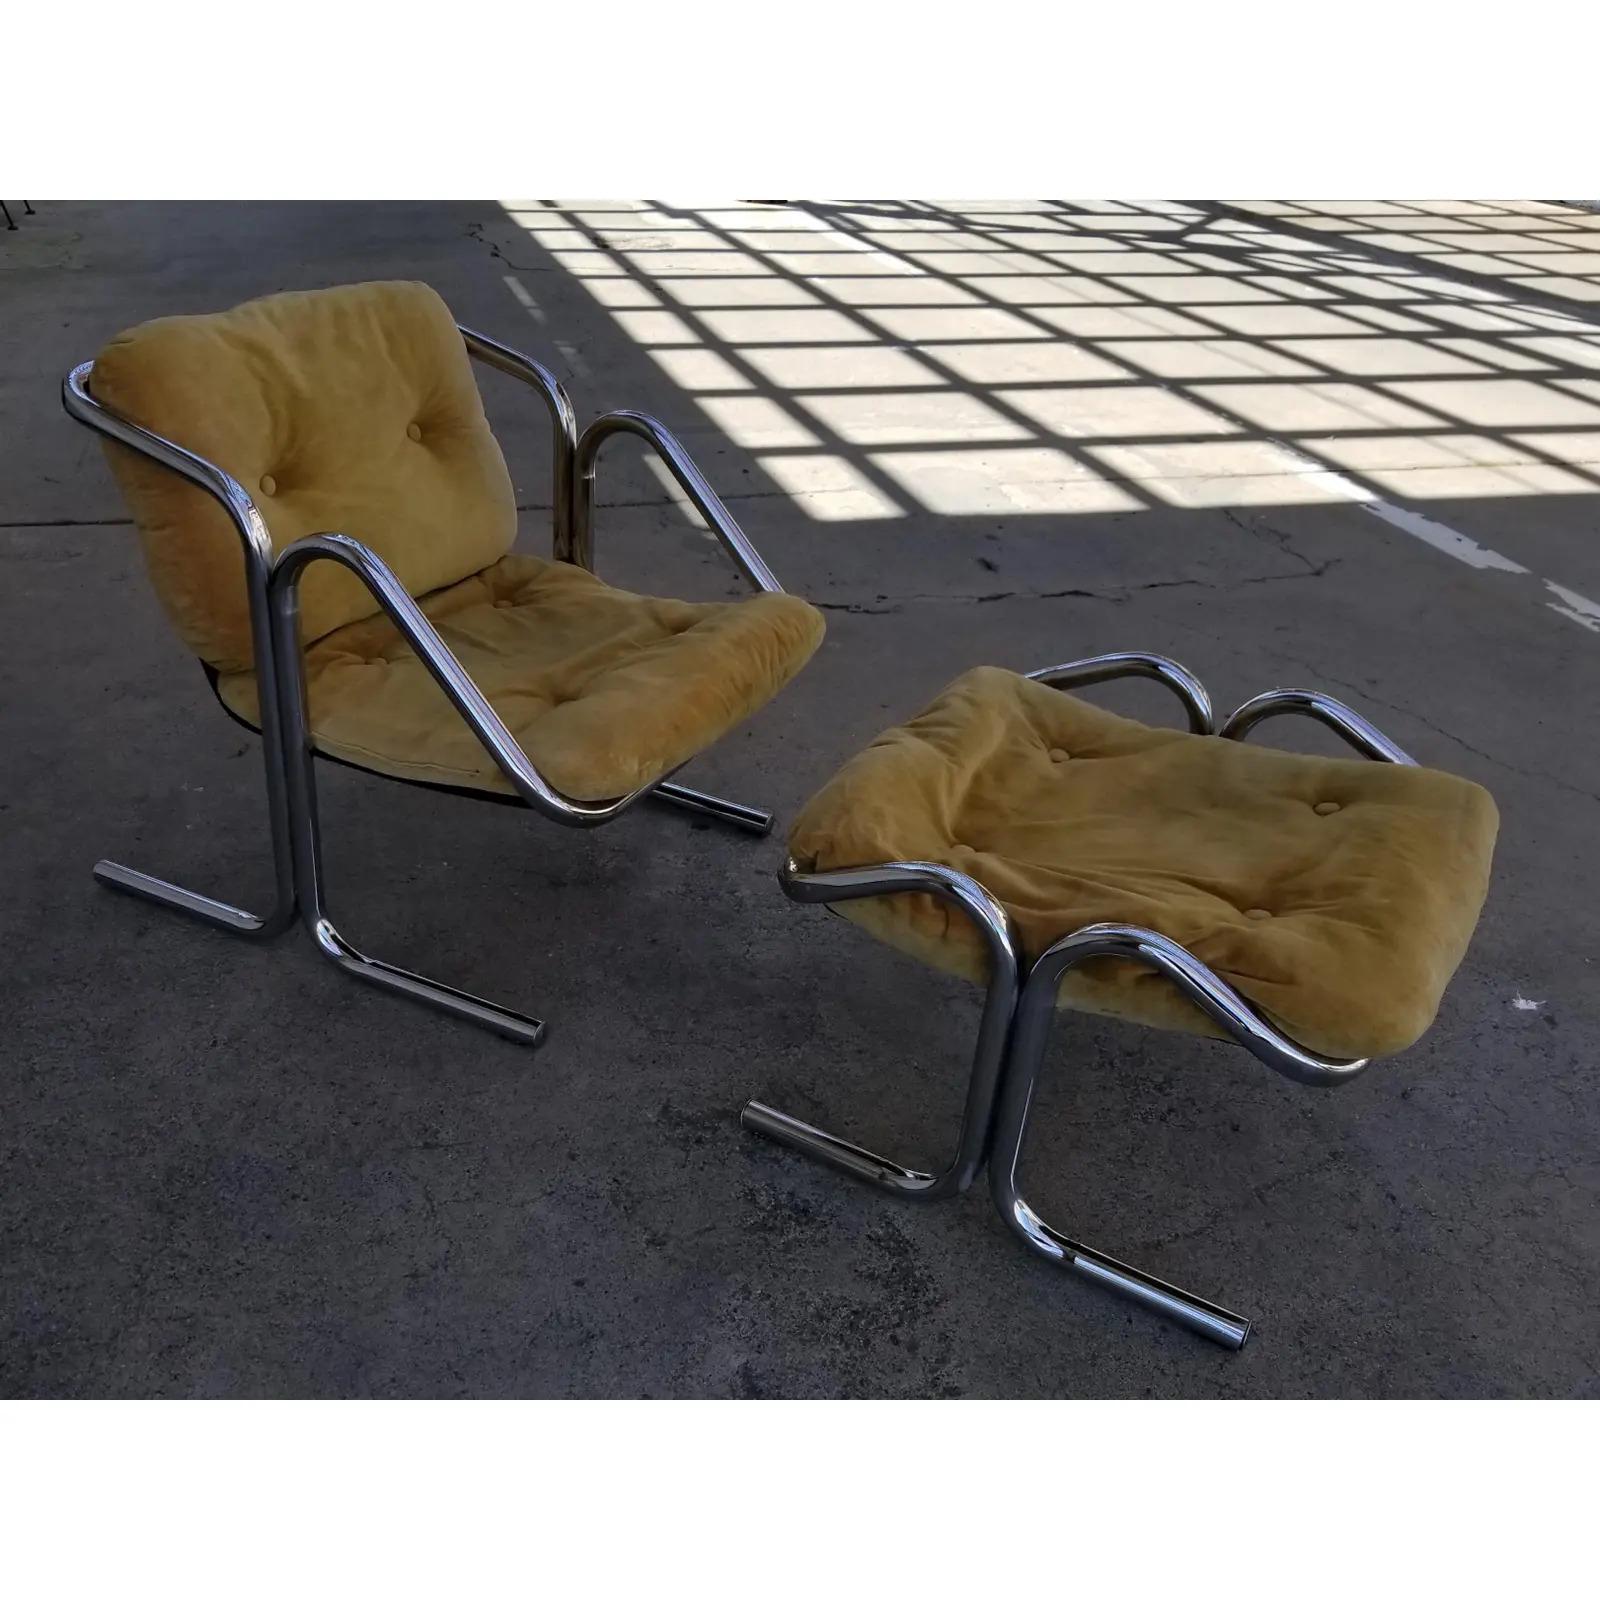 A tubular chrome cantilevered lounge chair and footstool by Jerry Johnson, circa 1970s. Chrome frame in exceptional original condition, original cushions are soft, but stained. New upholstery recommended. Chair only measures 25.5